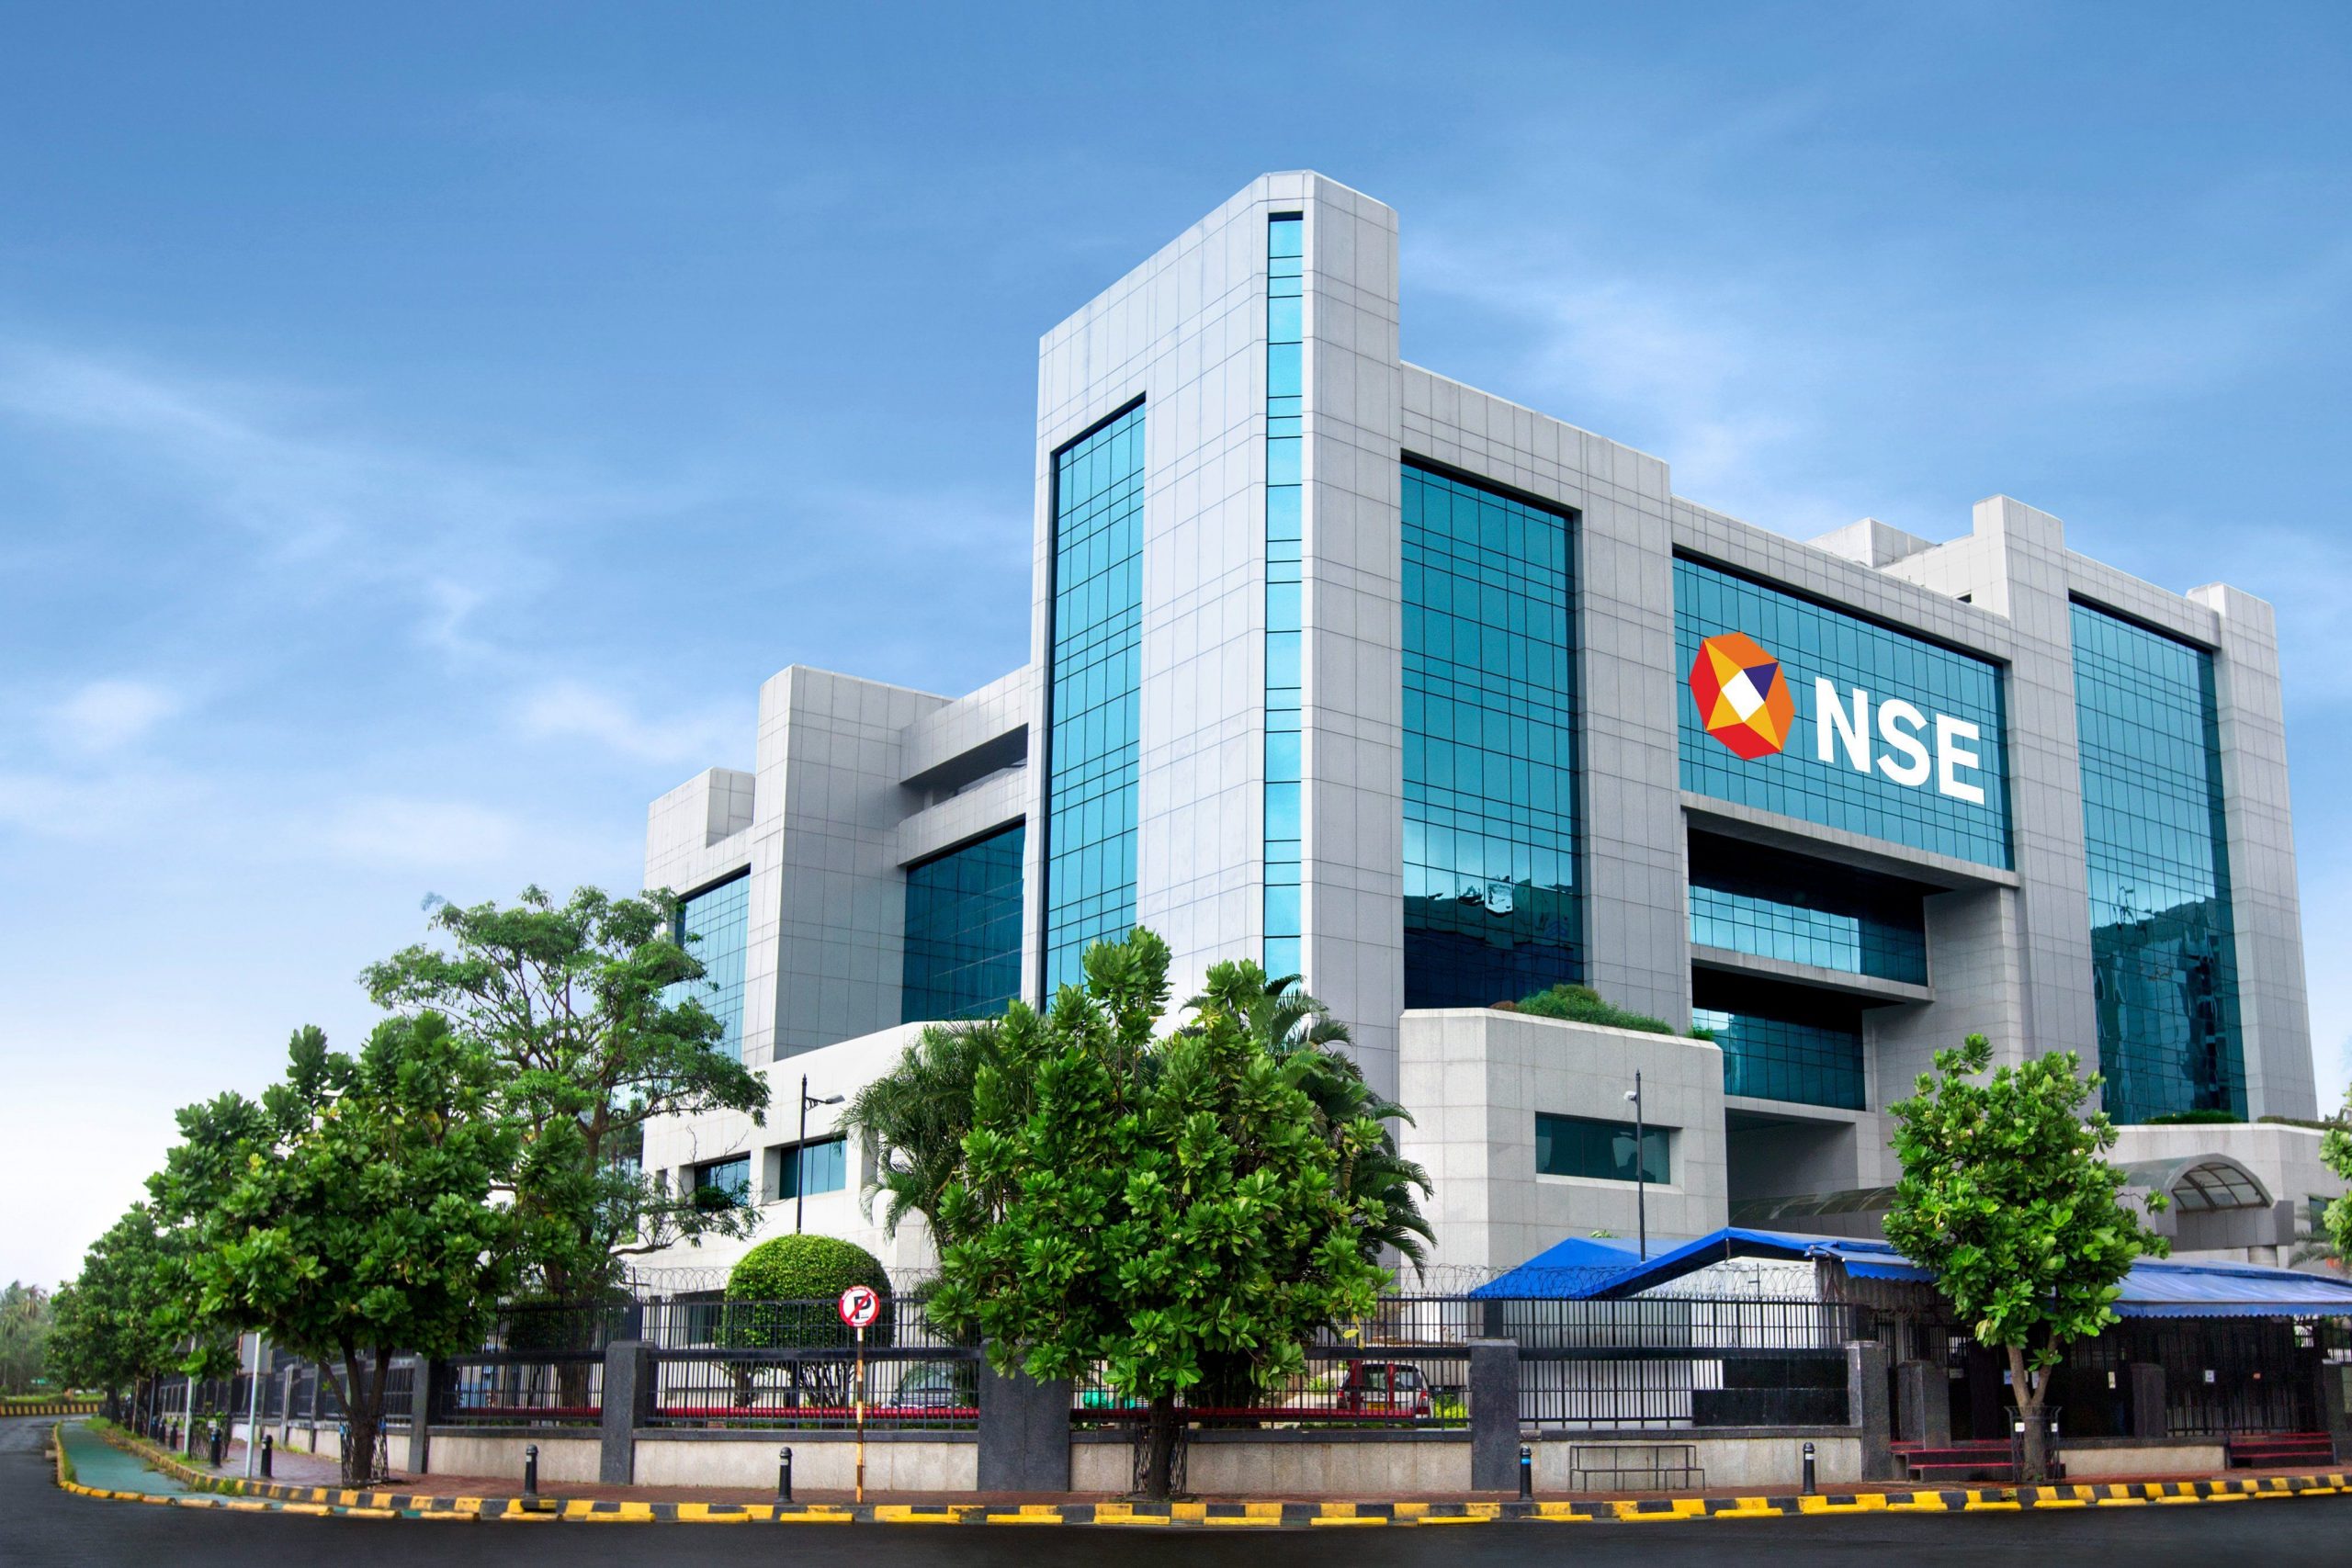 NSE F&O Ban: Indiabulls, RBL and others under ban on Monday, July 25, 2022